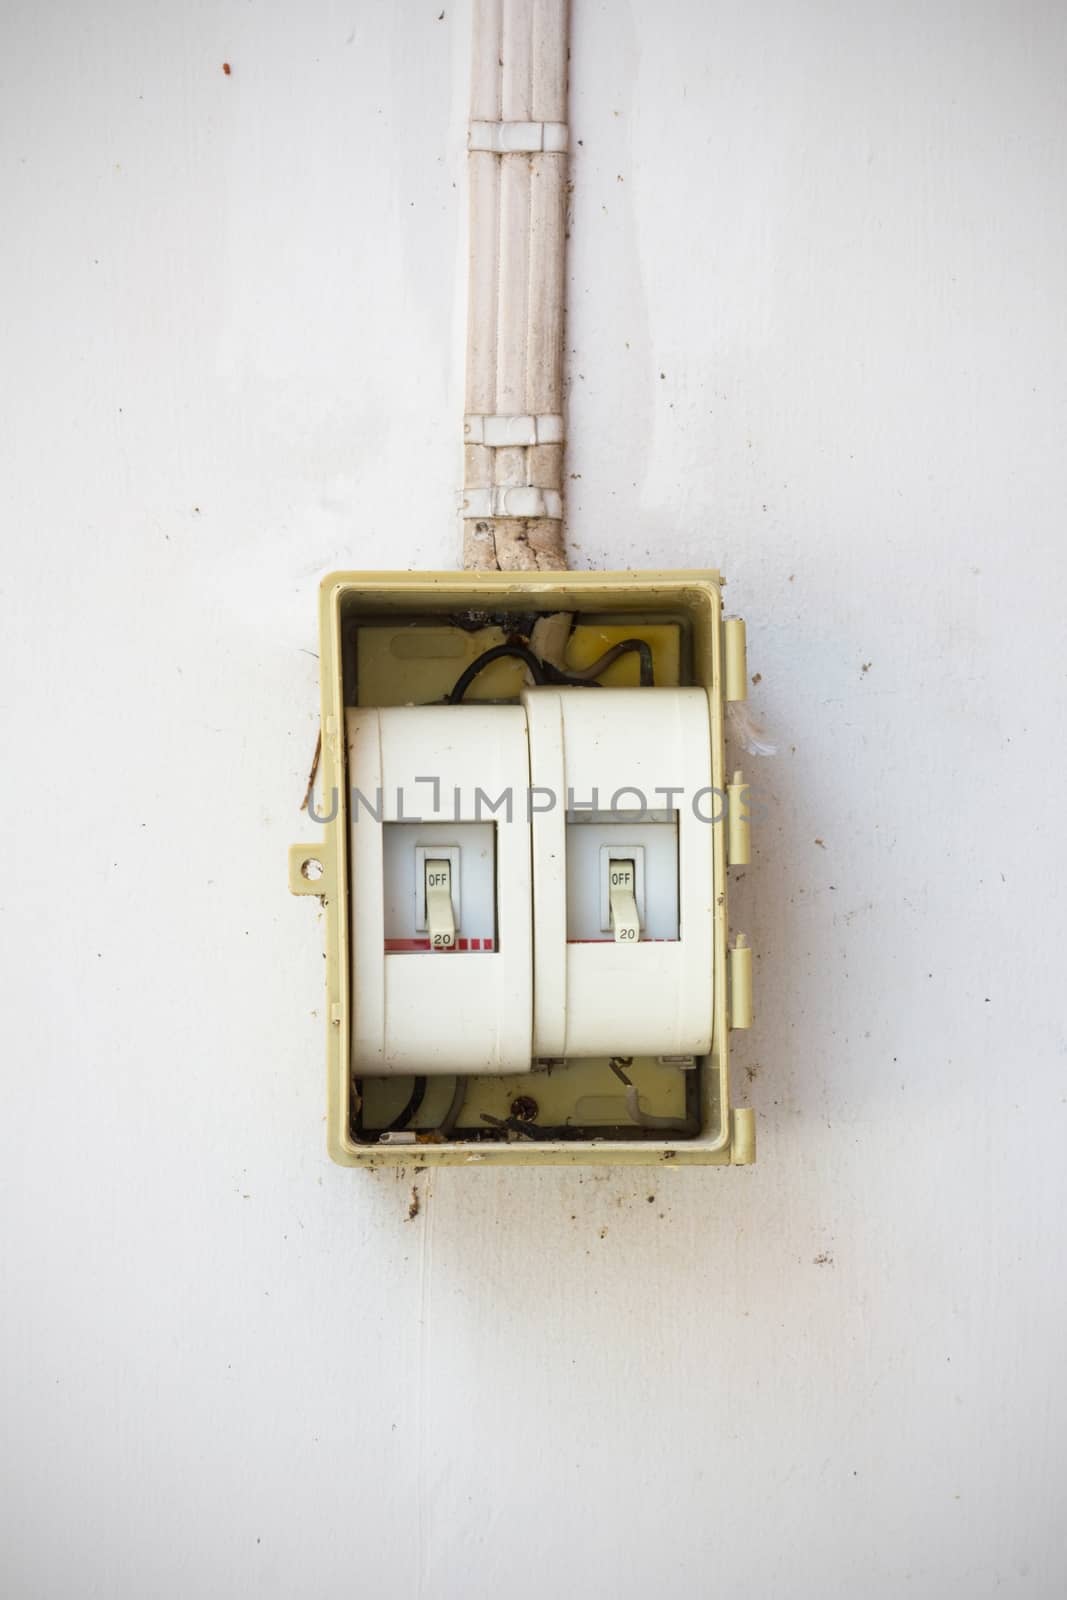 old light switch in the Off Position on dirty and old wall.